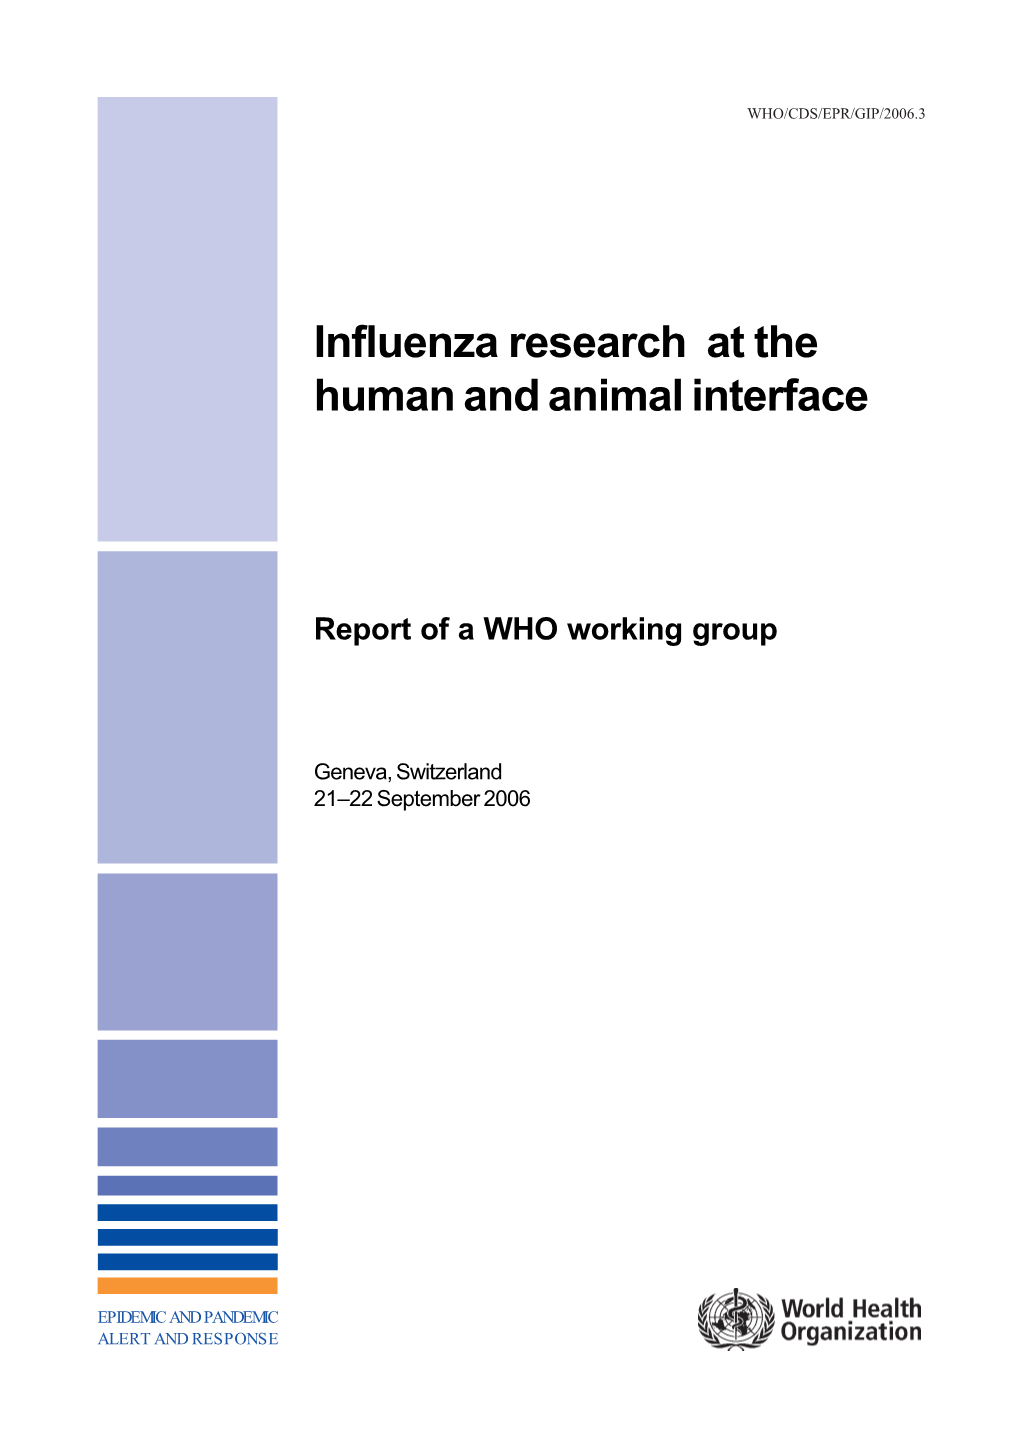 Influenza Research at the Human and Animal Interface